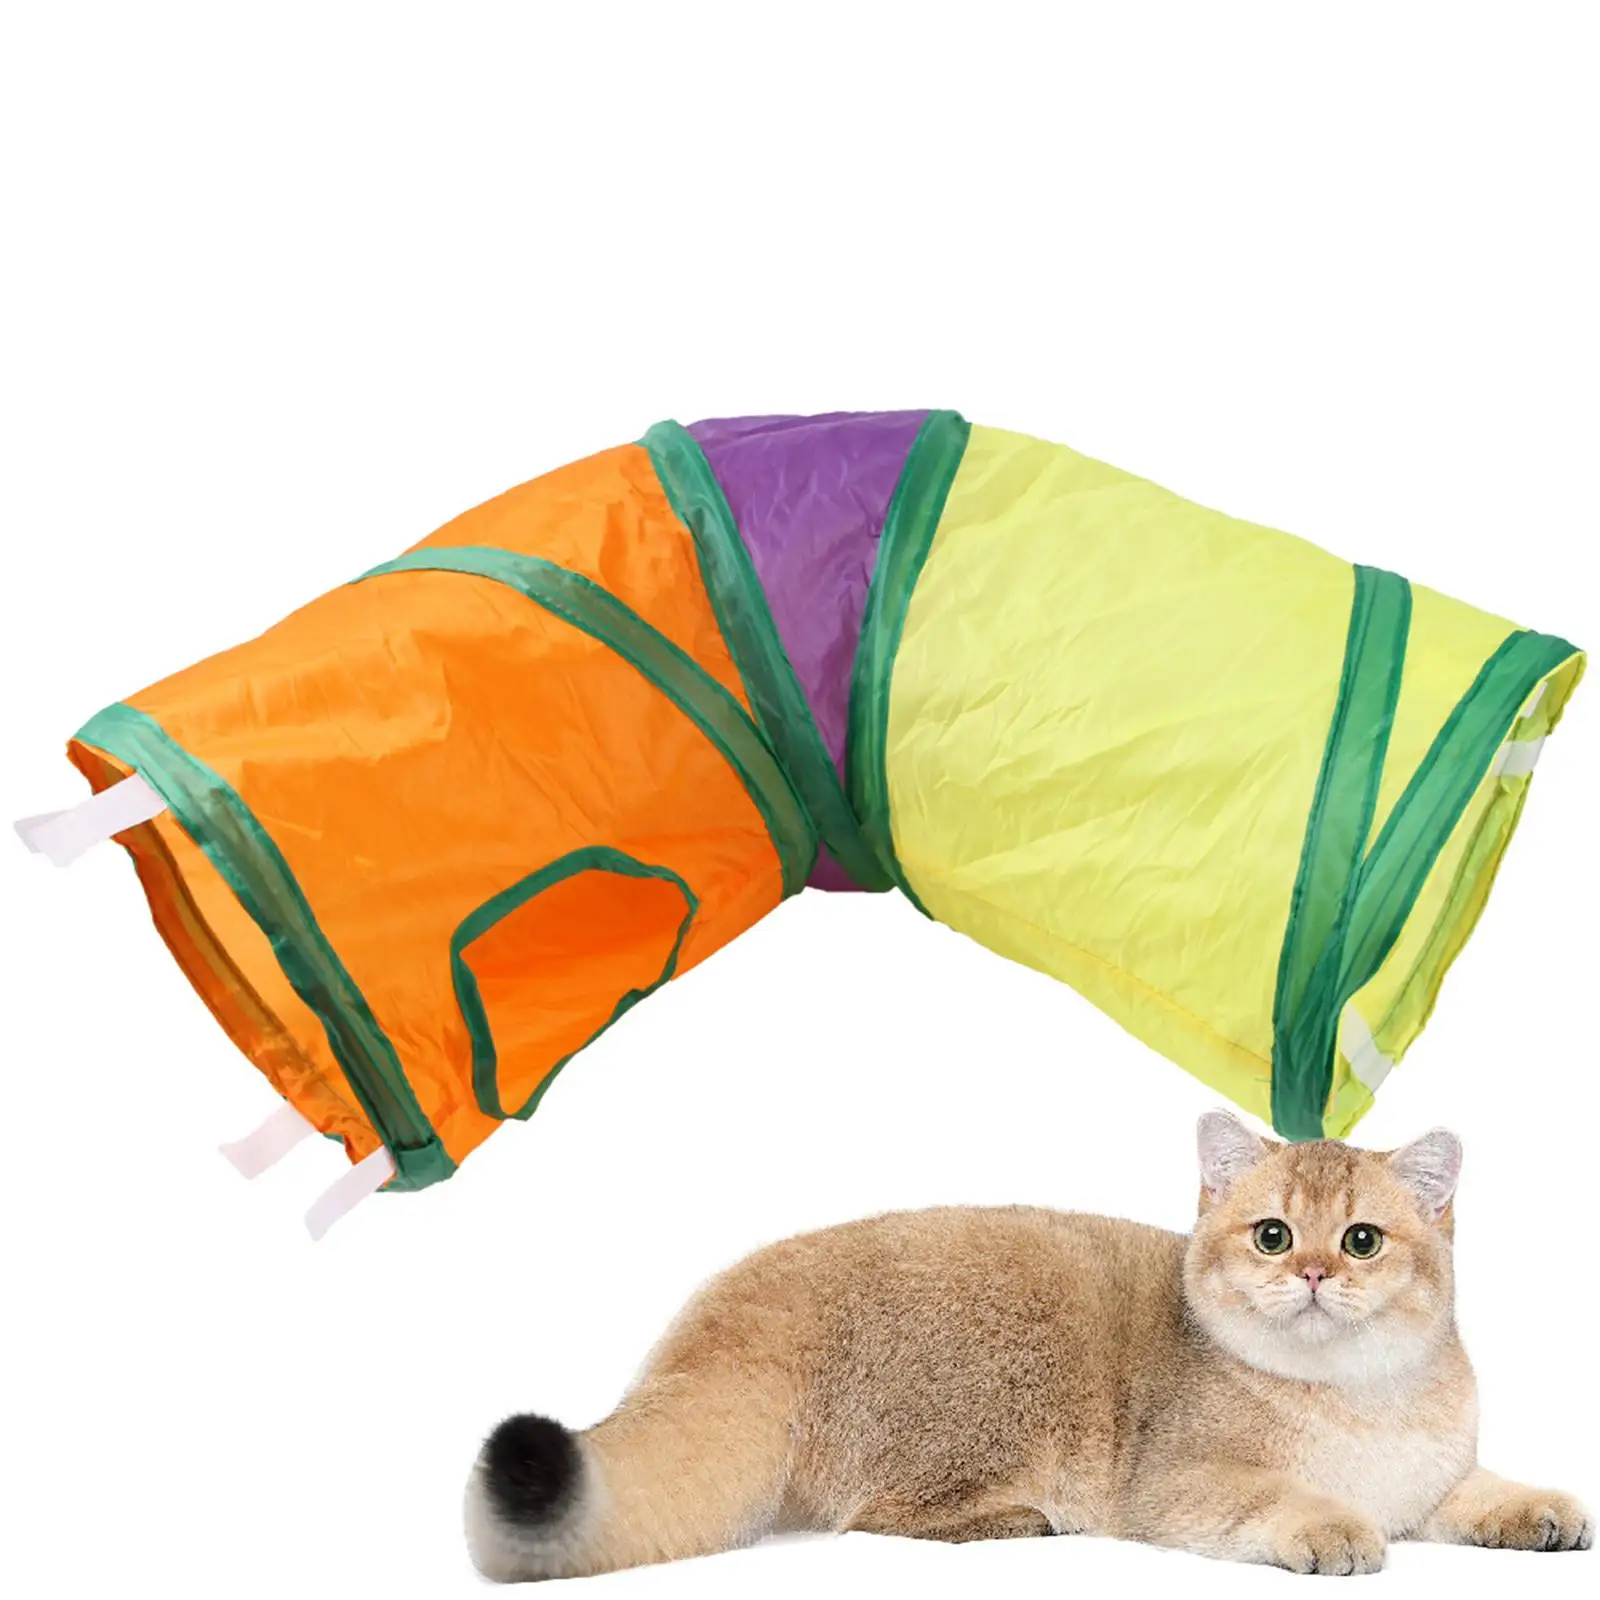 with Hole Cat Tunnel Toy Foldable L Shaped Flexible Portable Colorful Play Chase Tunnels for Game Kitty Exercising Kitten Puppy